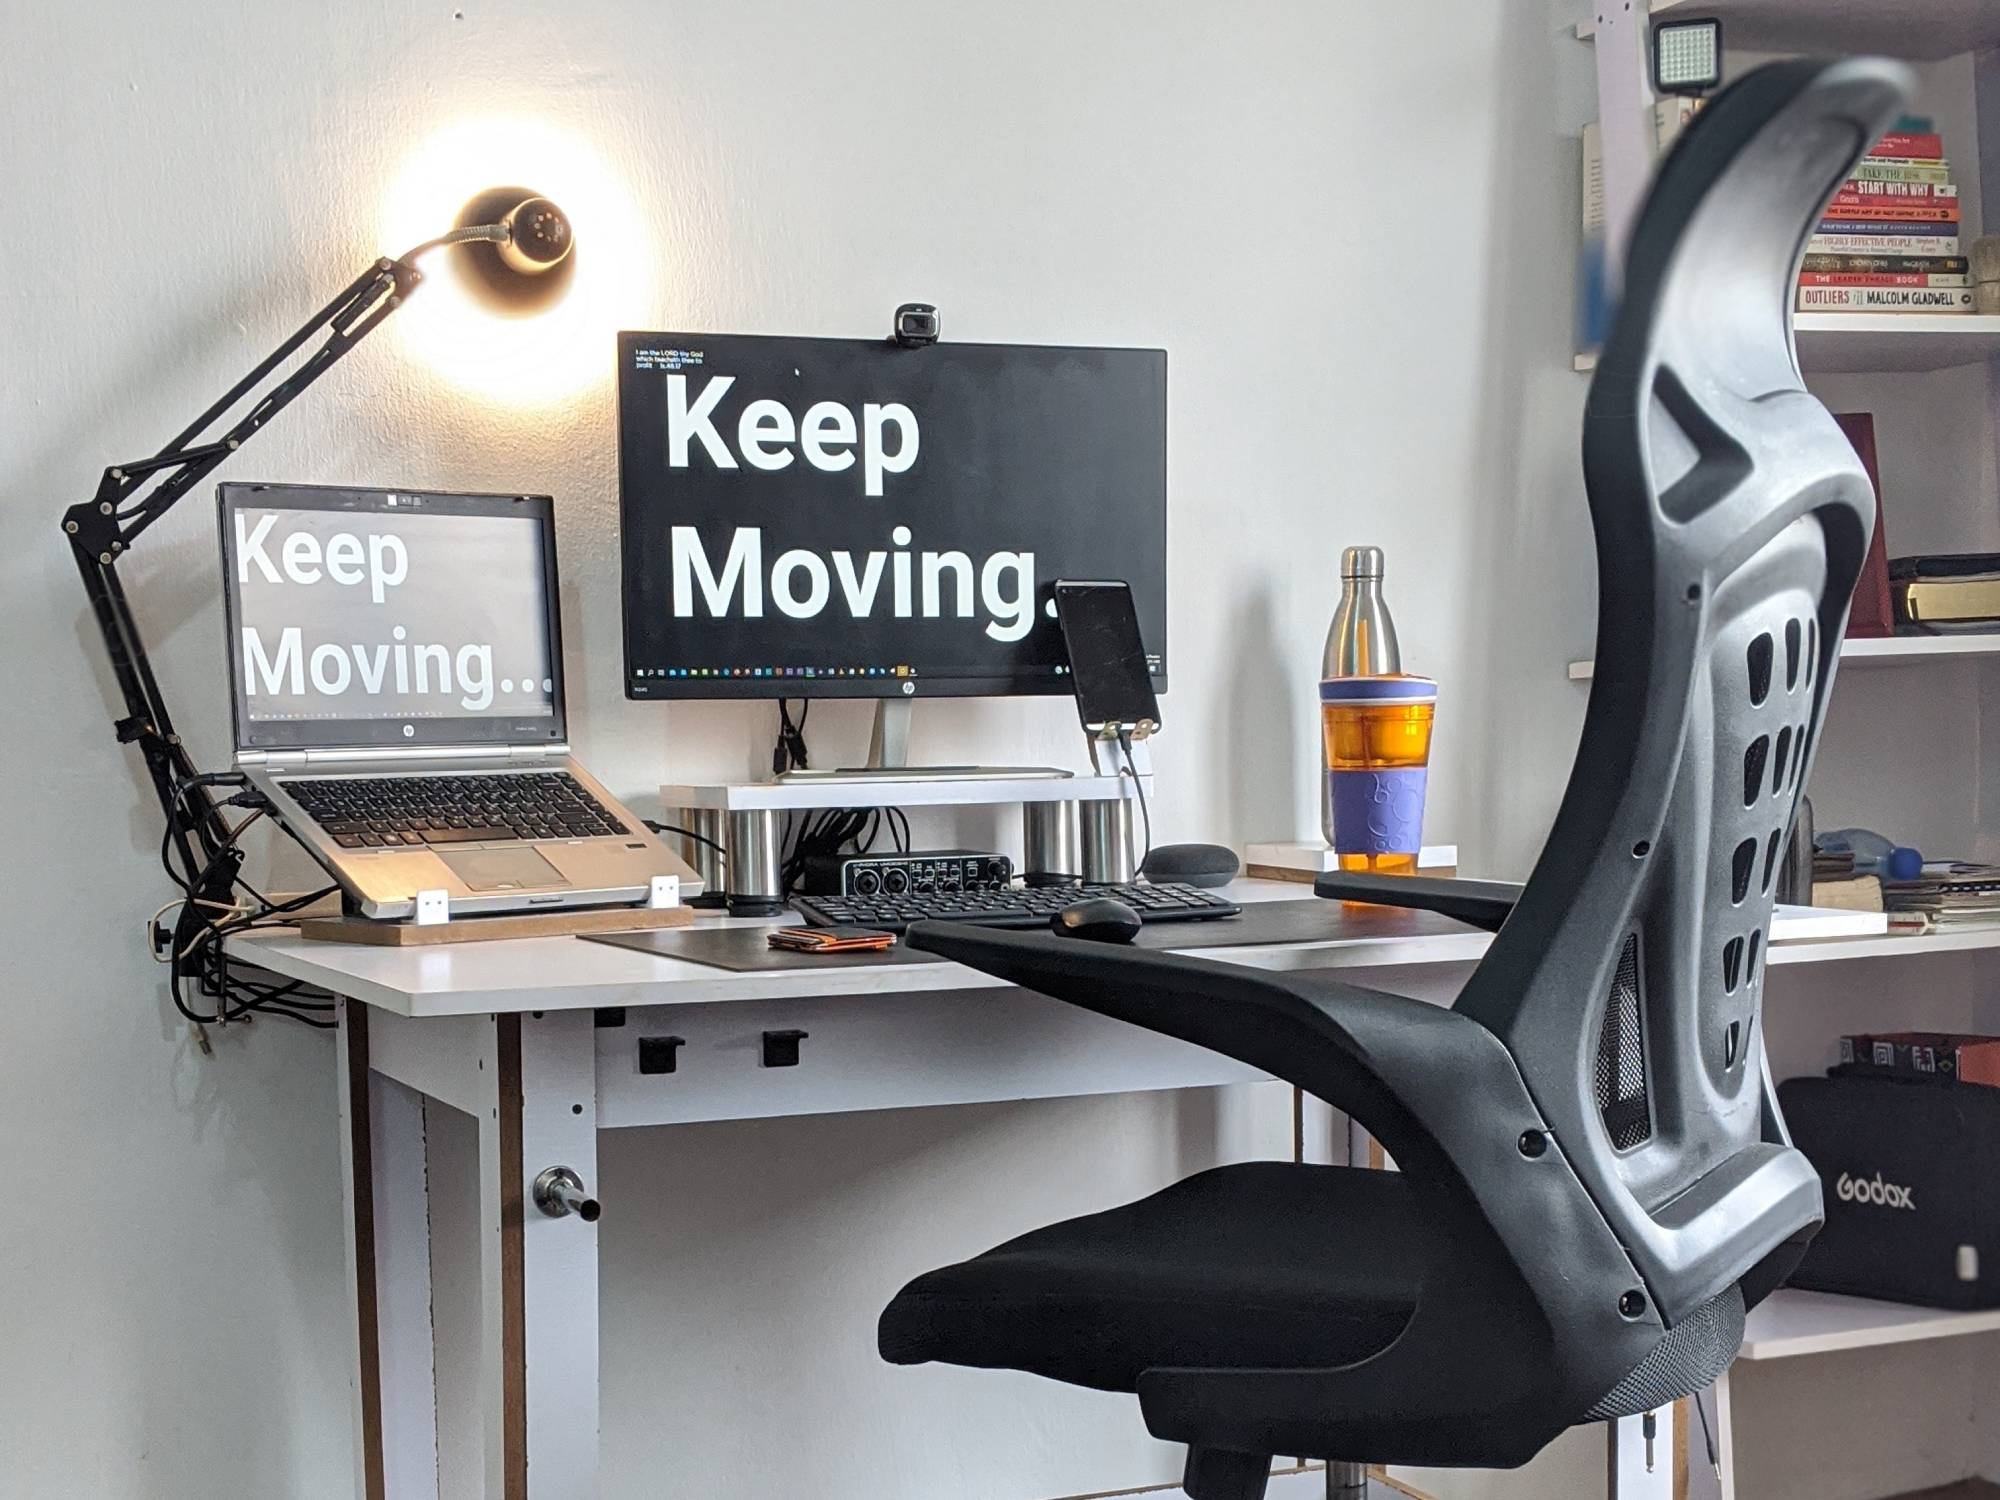 25 Home Office Essentials to Set Up an Ergonomic Workplace